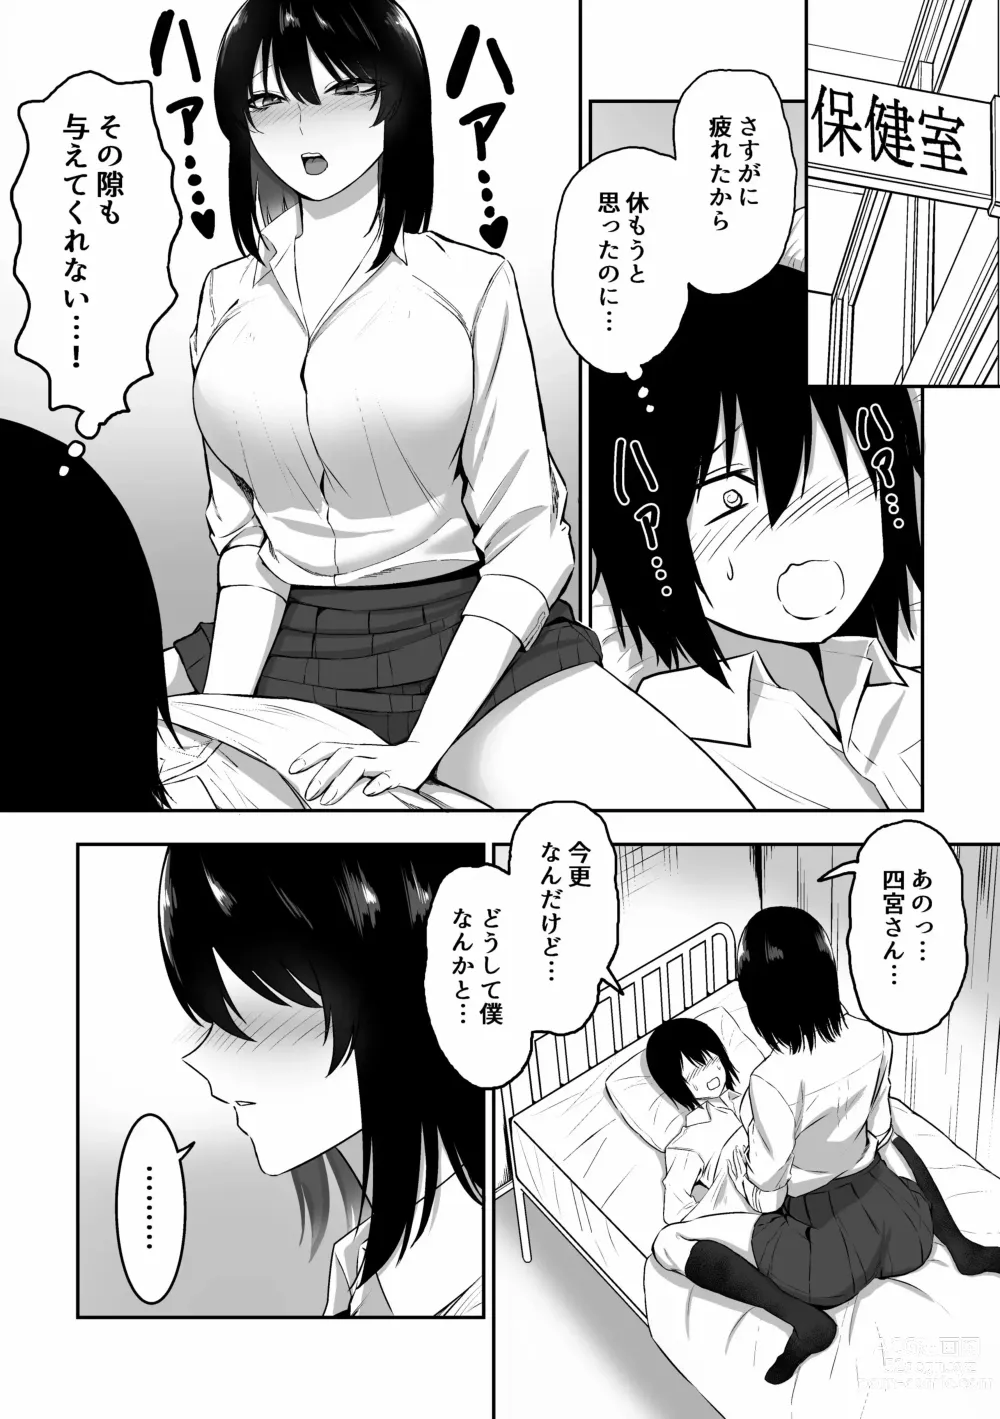 Page 143 of doujinshi 三食纳豆辣妹